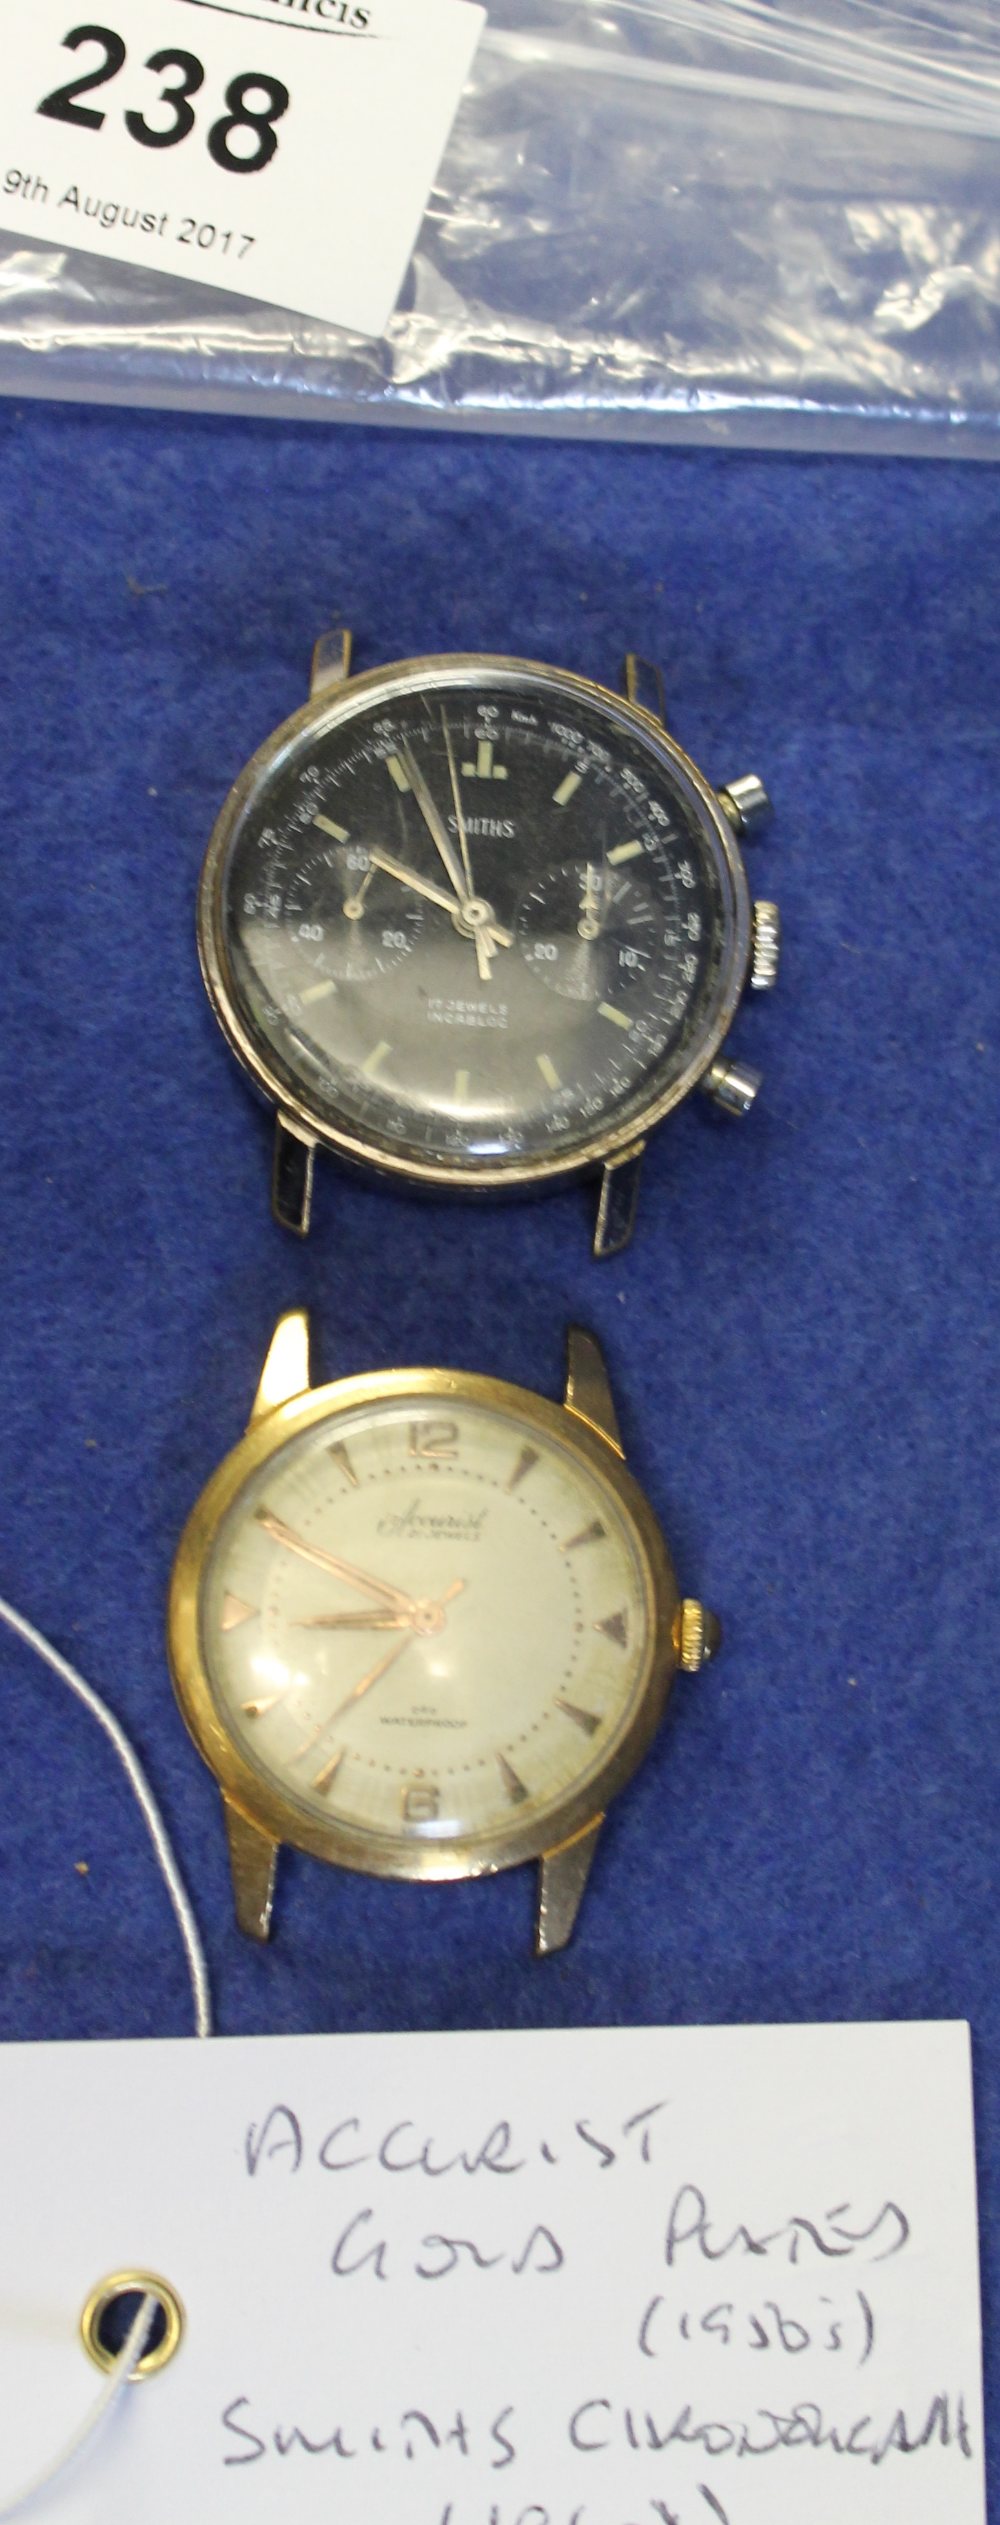 Accurist gold plated 1950s wristwatch head together with Smith's chronograph 1960s wristwatch head. - Image 2 of 2